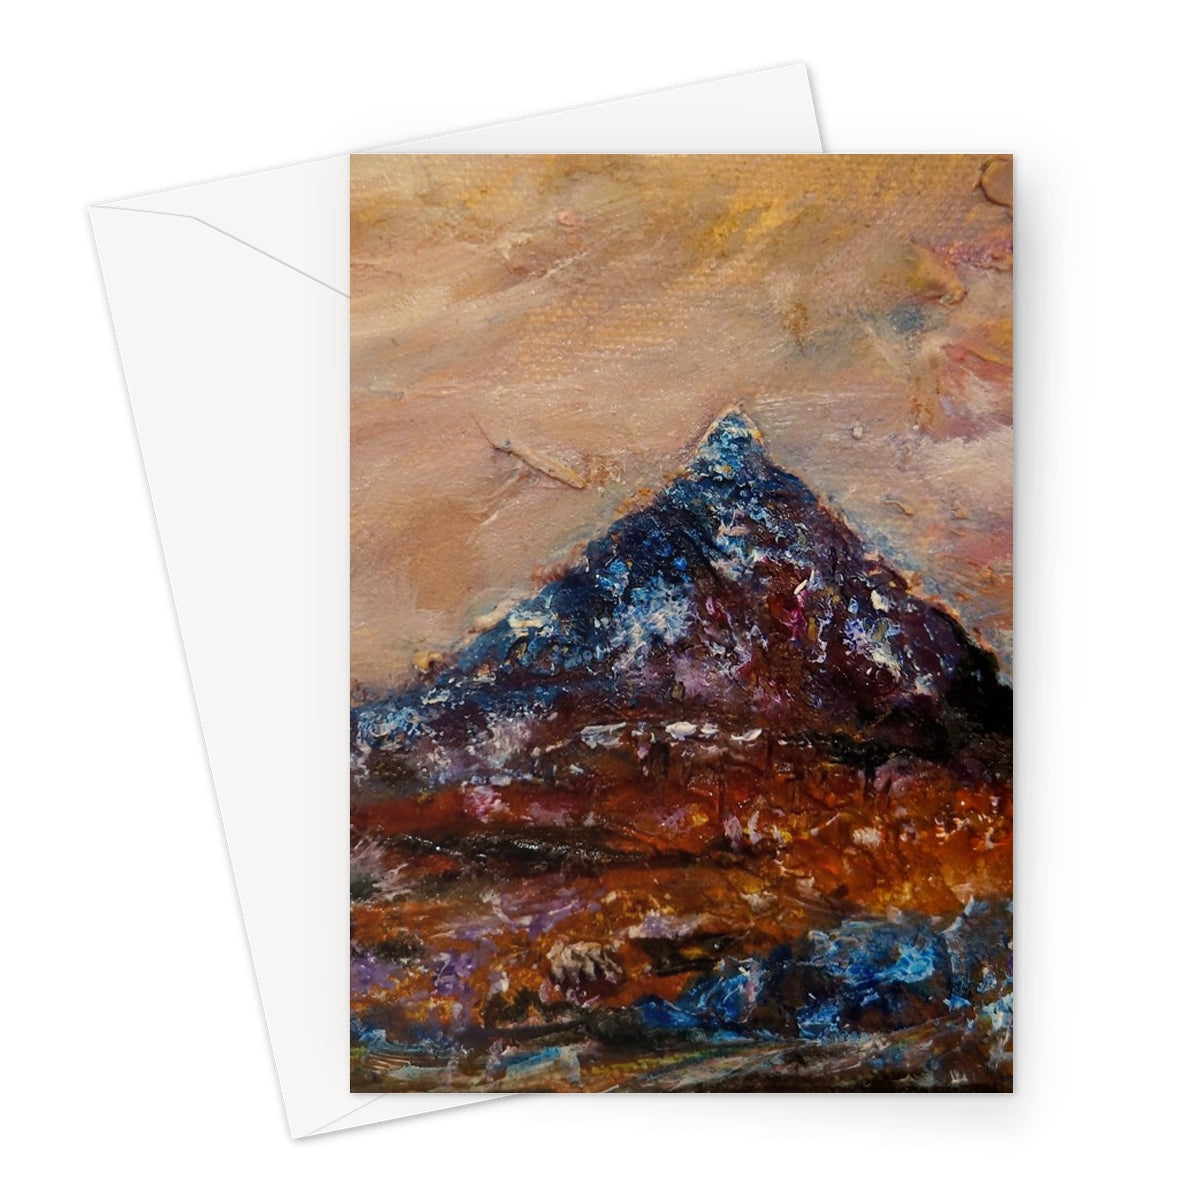 Buachaille Etive Mòr Art Gifts Greeting Card-Greetings Cards-Glencoe Art Gallery-A5 Portrait-10 Cards-Paintings, Prints, Homeware, Art Gifts From Scotland By Scottish Artist Kevin Hunter